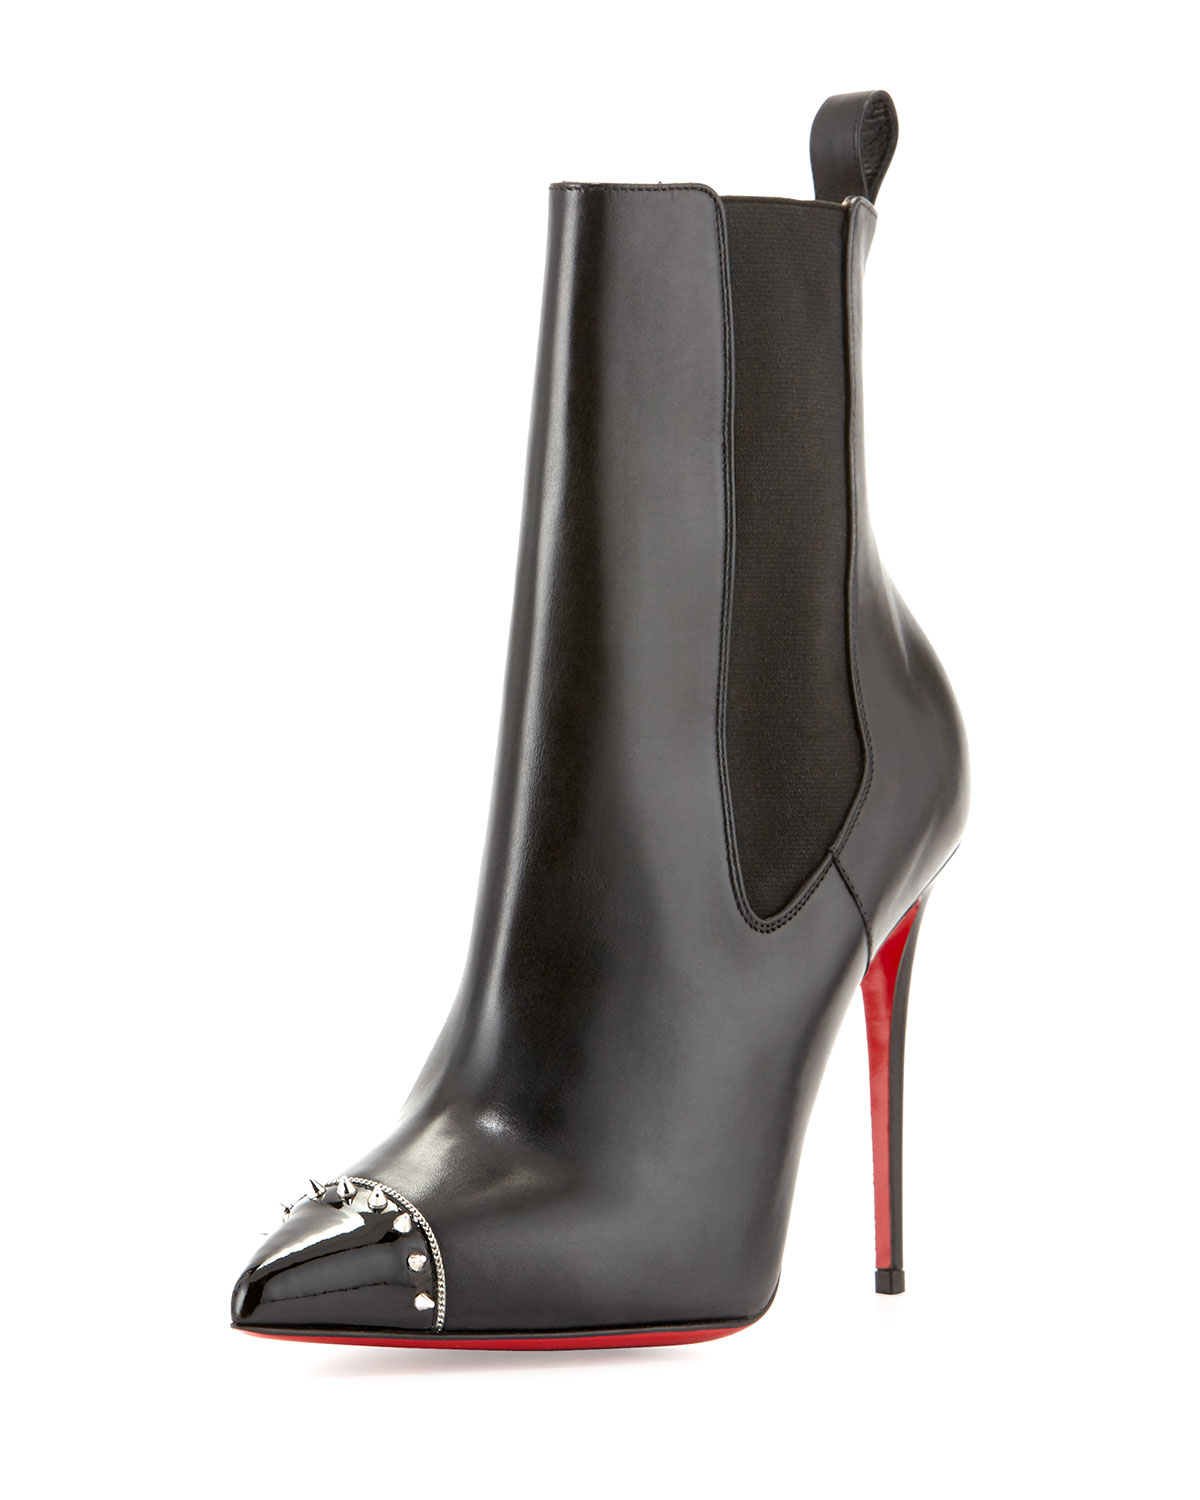 christian louboutin black leather booties - Obsidian Wellness Centre